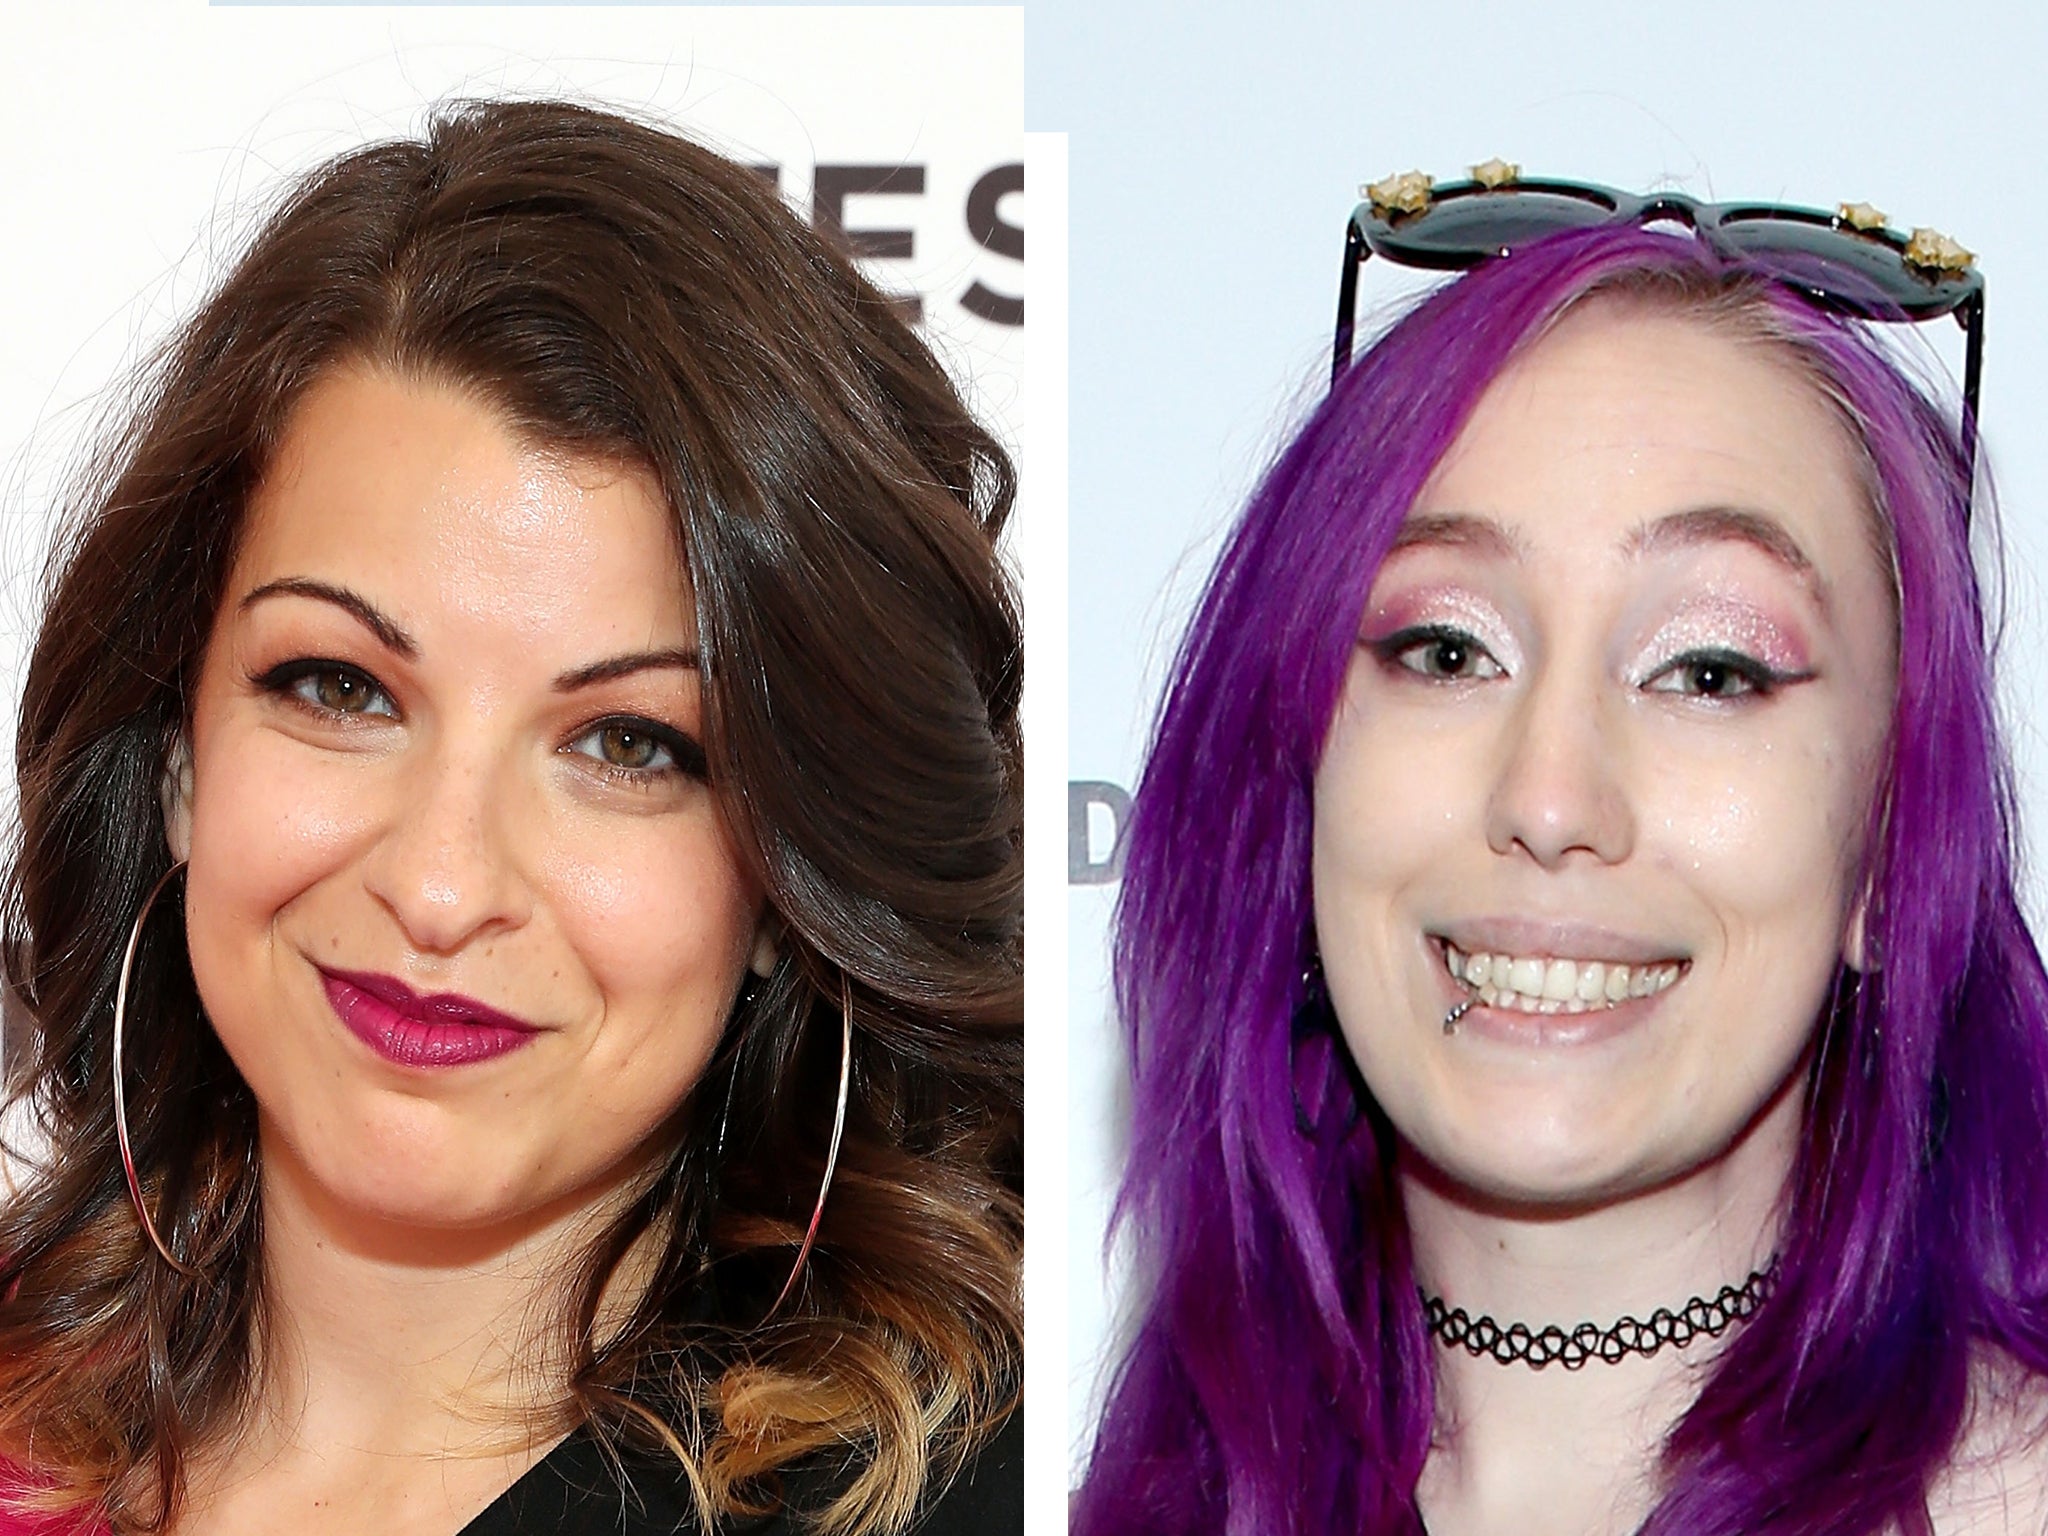 Anita Sarkeesian (L) cancelled a speech after being threatened during the Gamergate scandal, which saw outrageous claims made against Zoe Quinn (R)